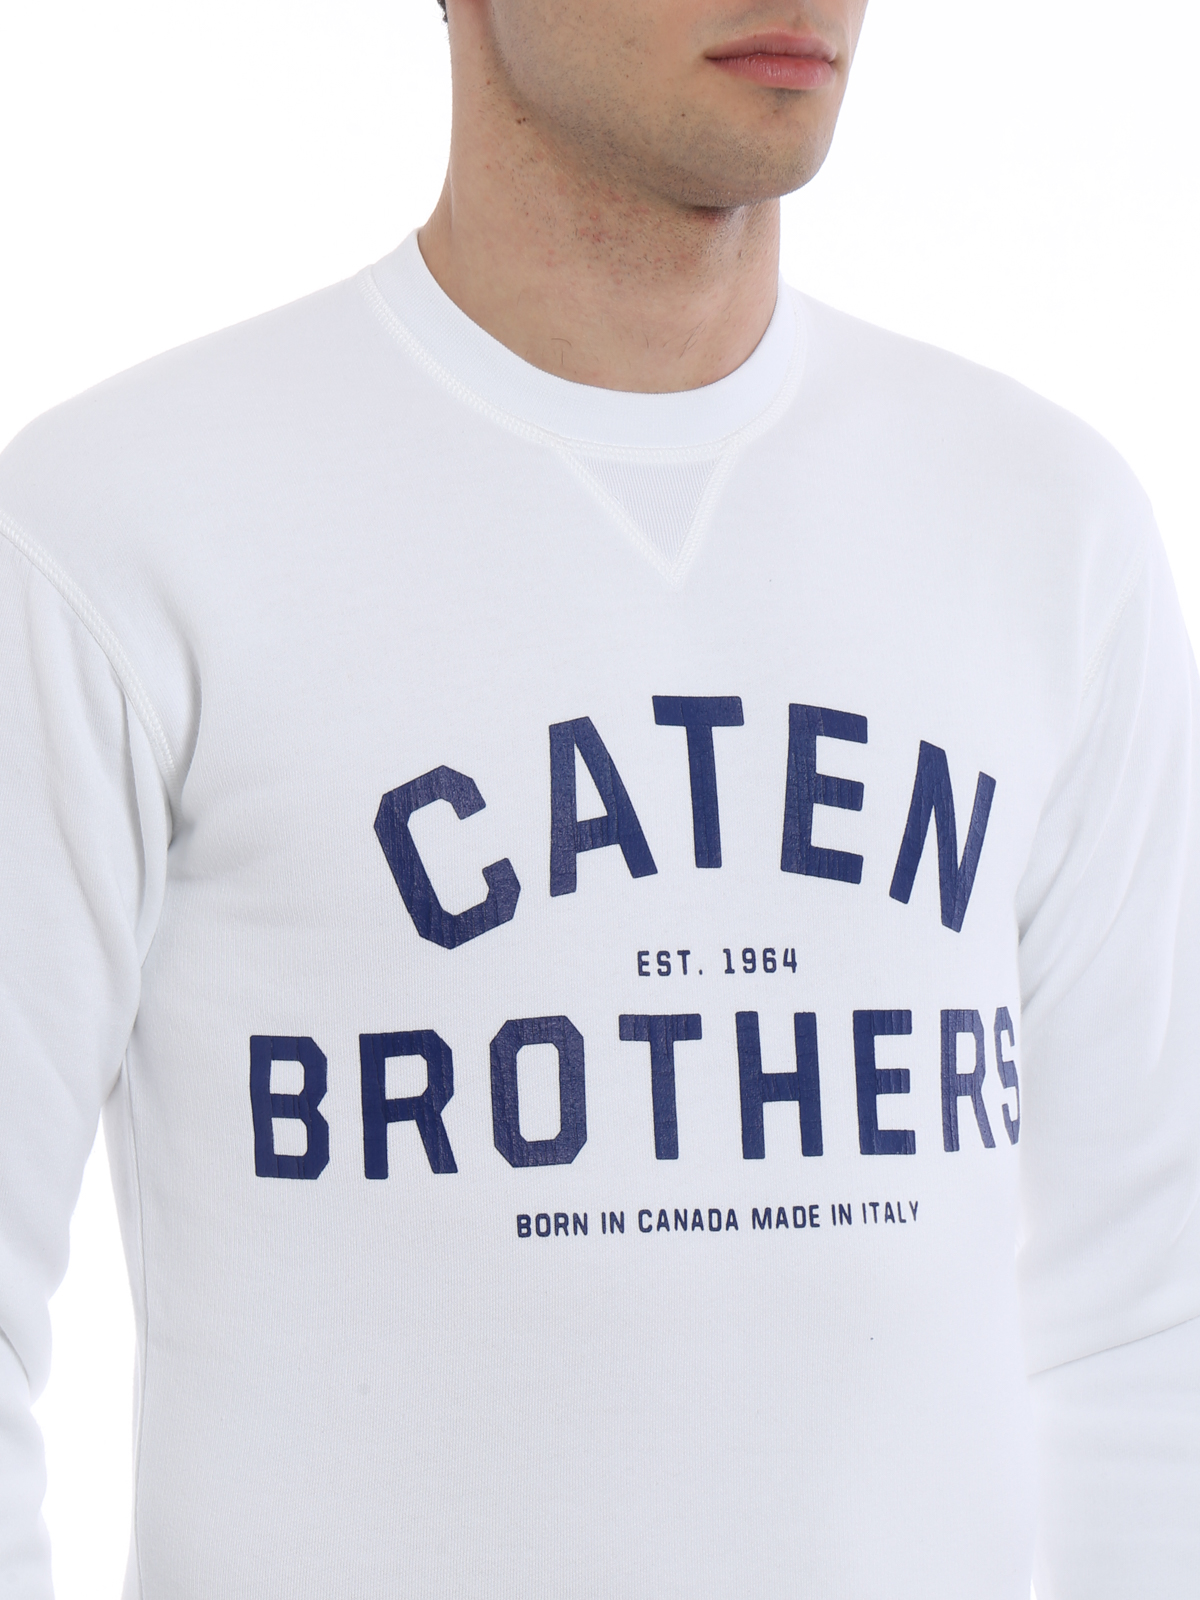 caten brothers